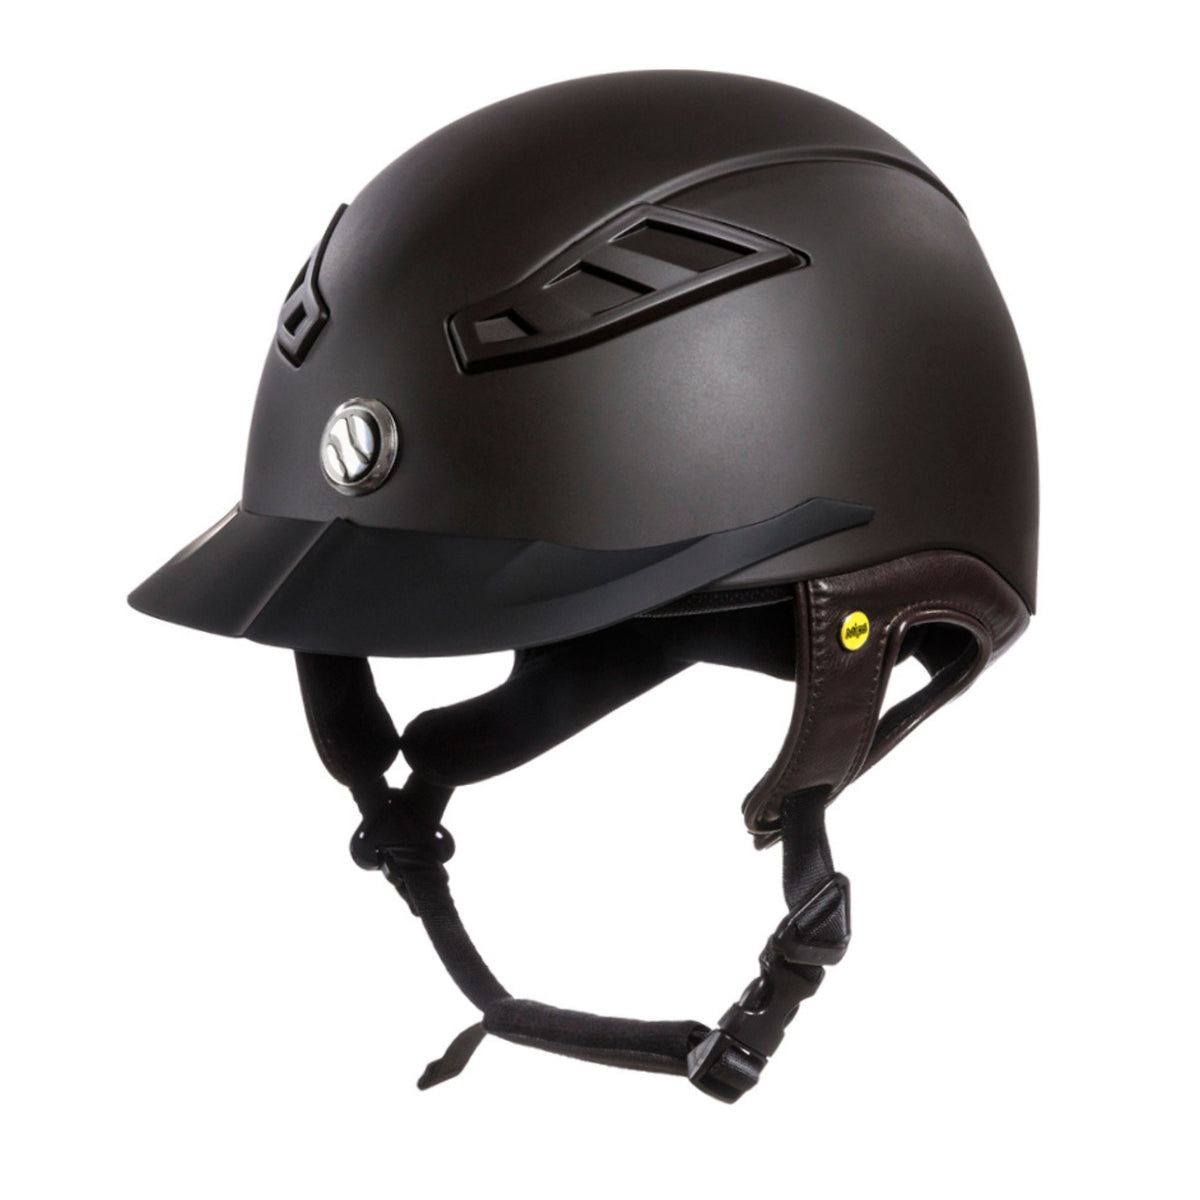 Brown helmet with leather ear straps and durable plastic brim.